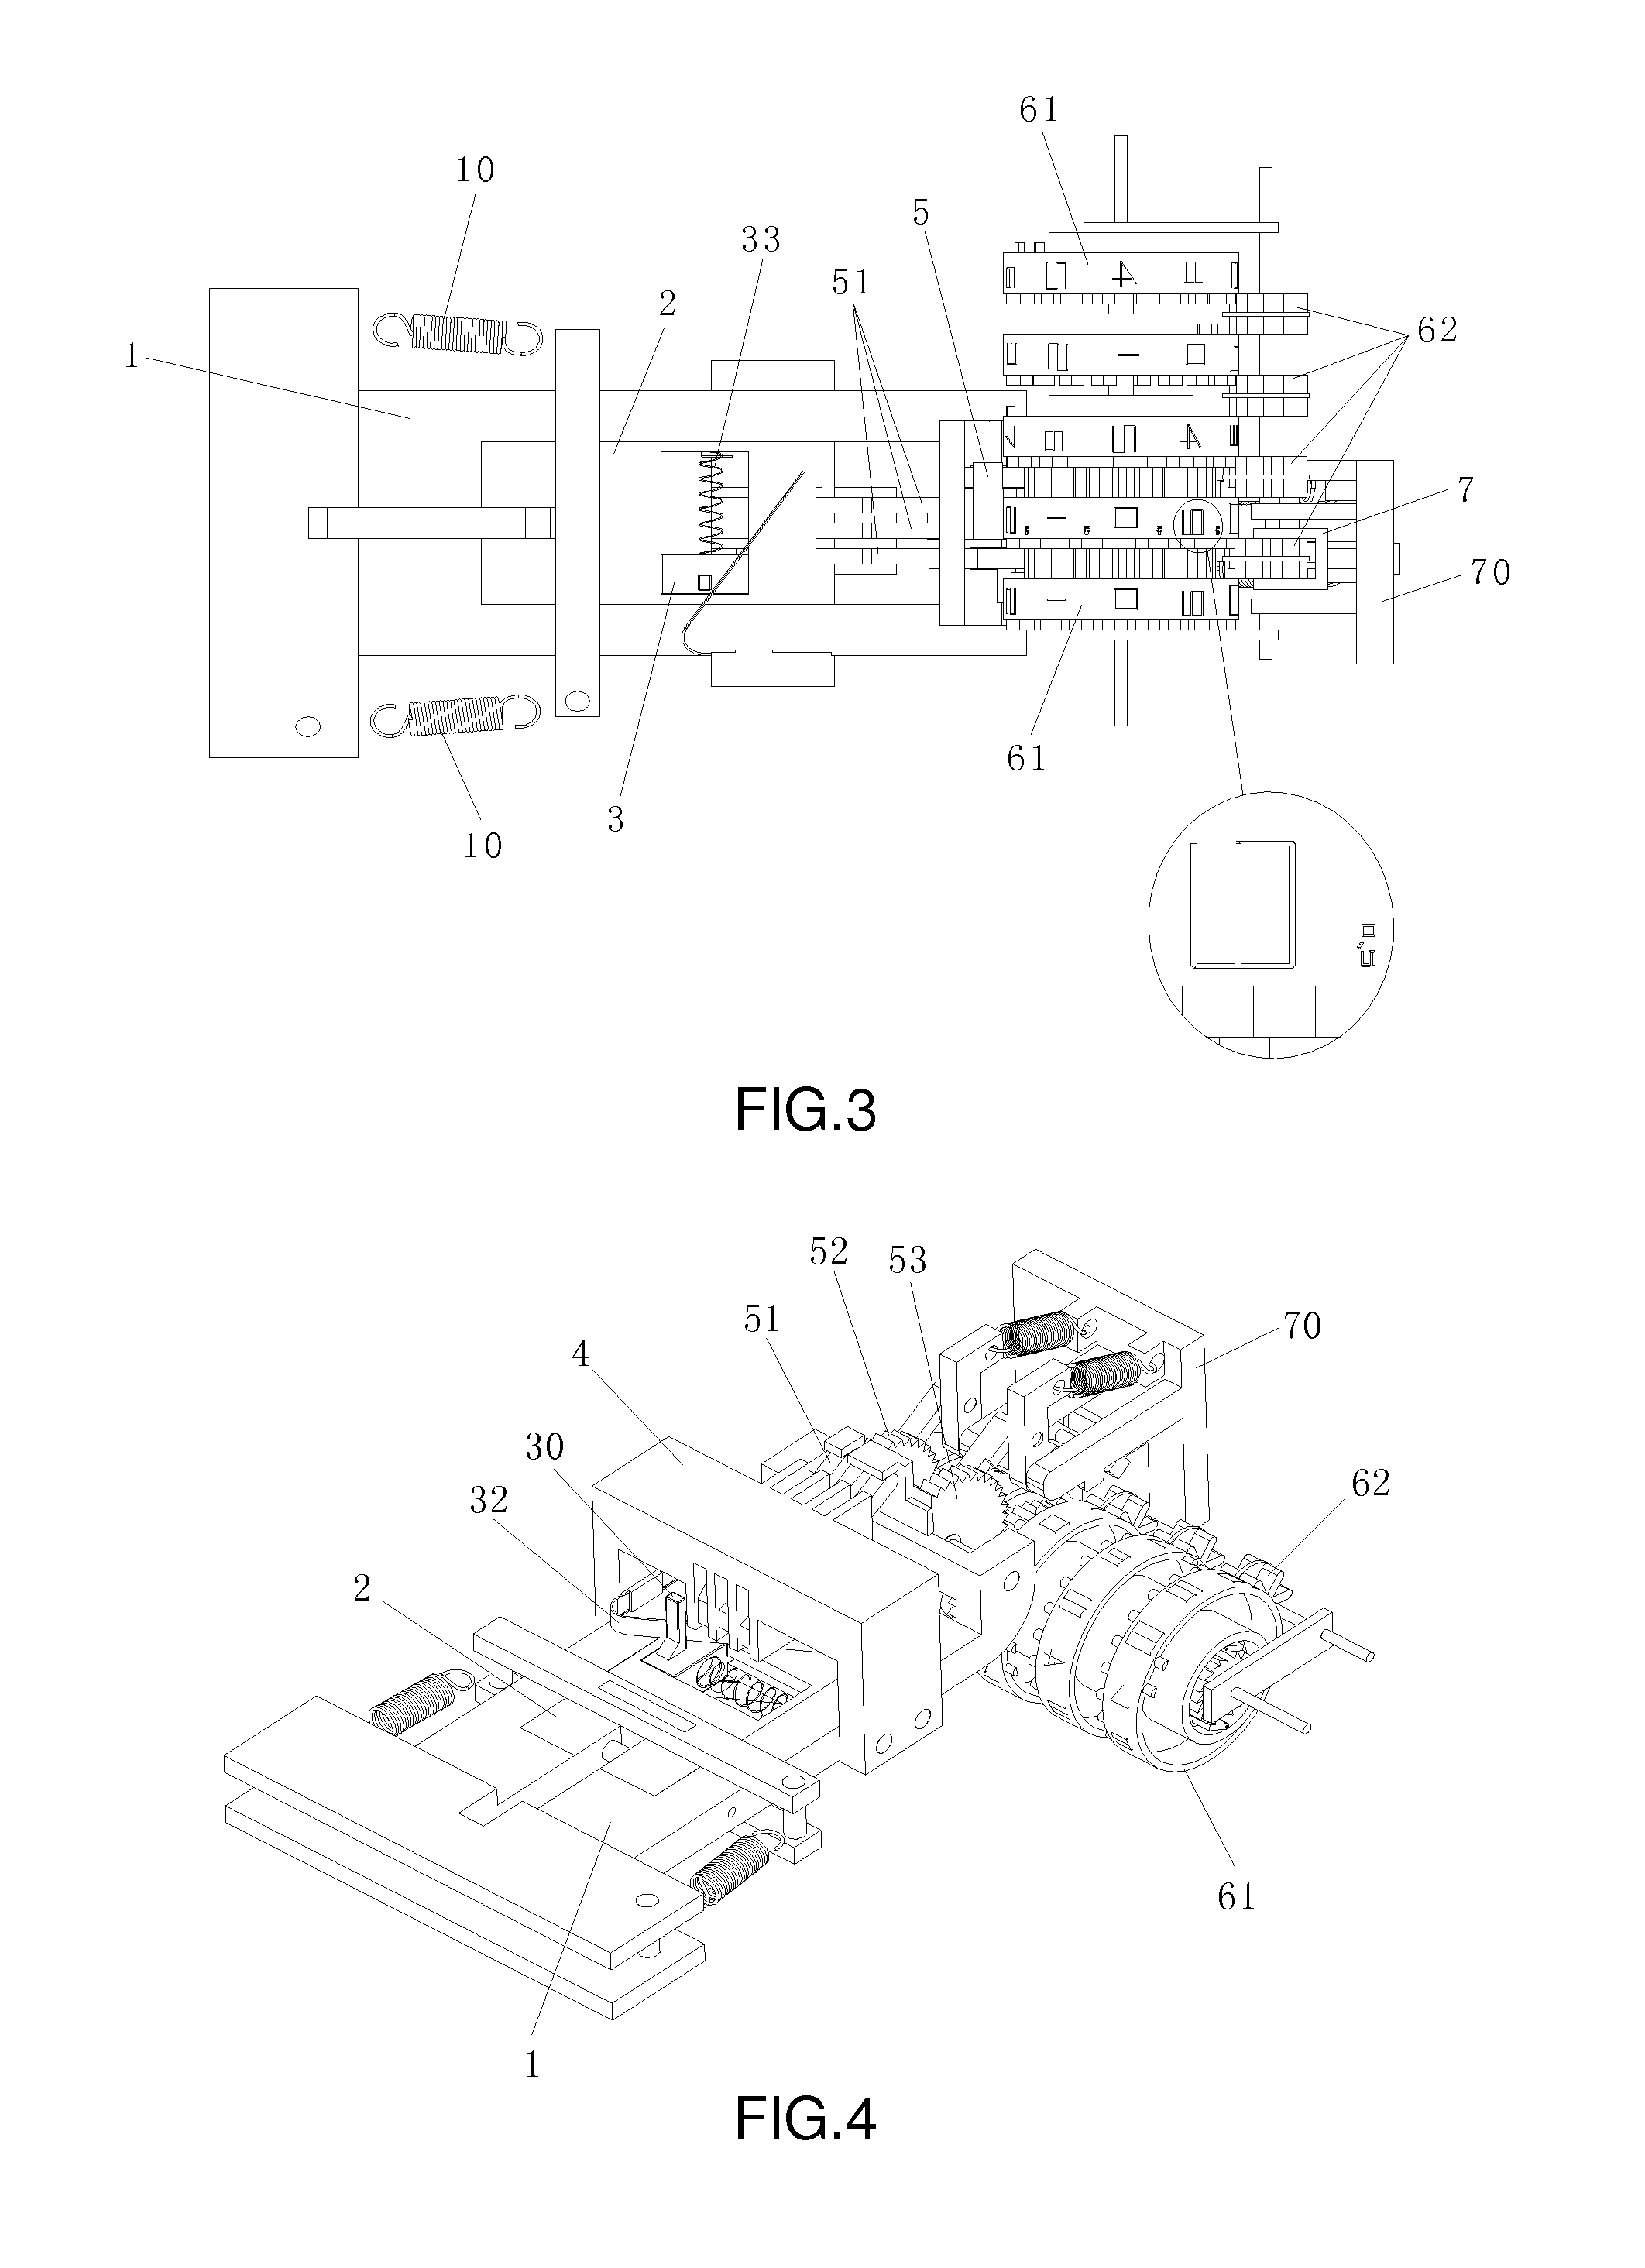 Coin deposit and summation memory device